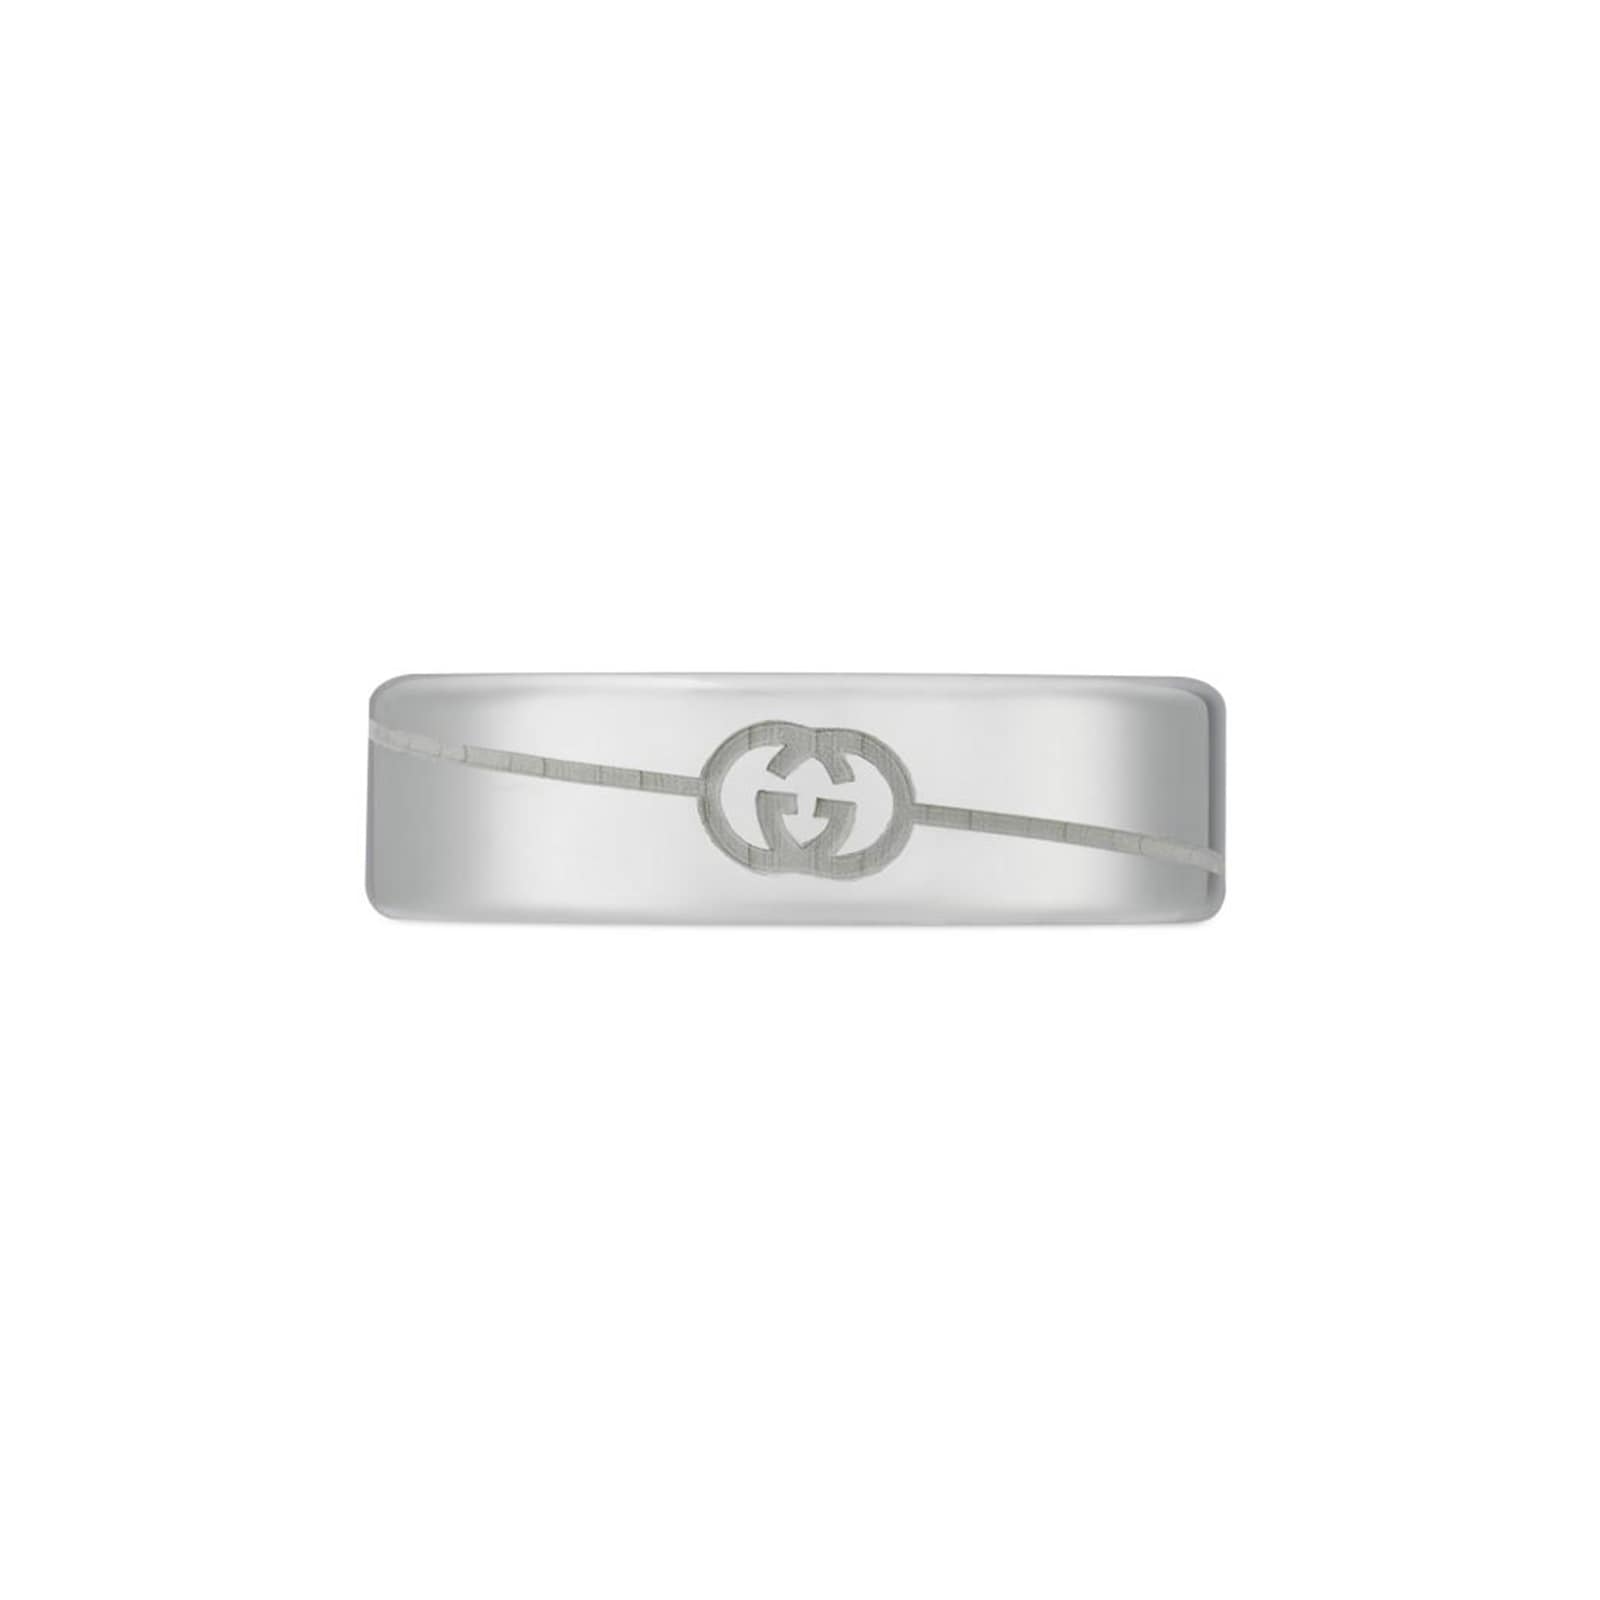 Tag Sterling Silver With Interlocking G Logo 6mm Ring - Ring Size U